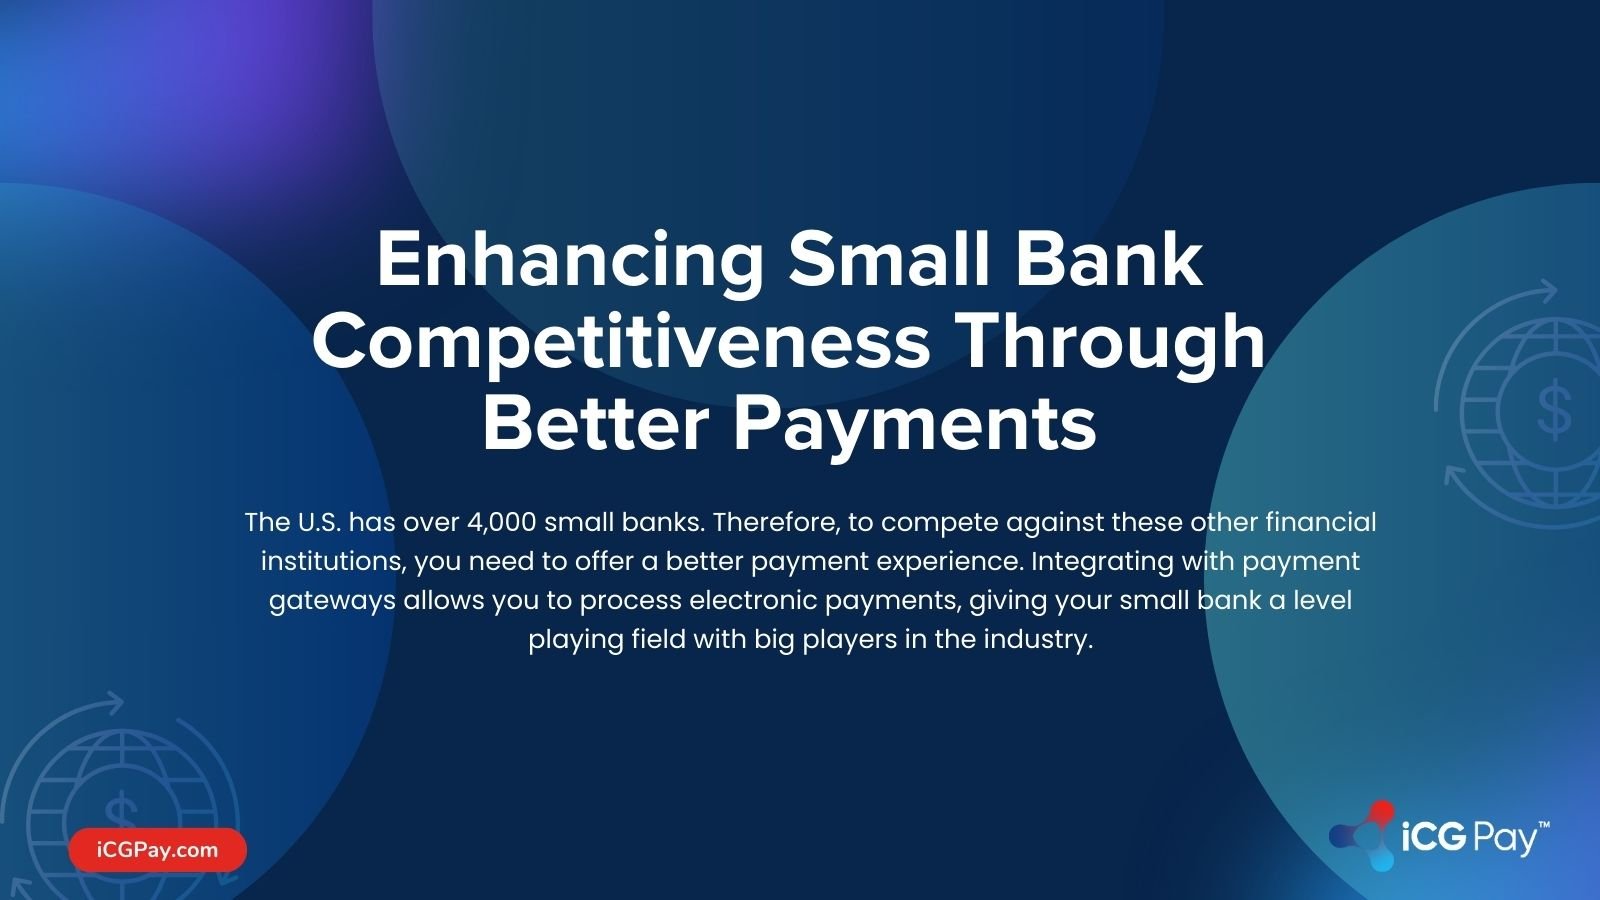 Better payments for small banks